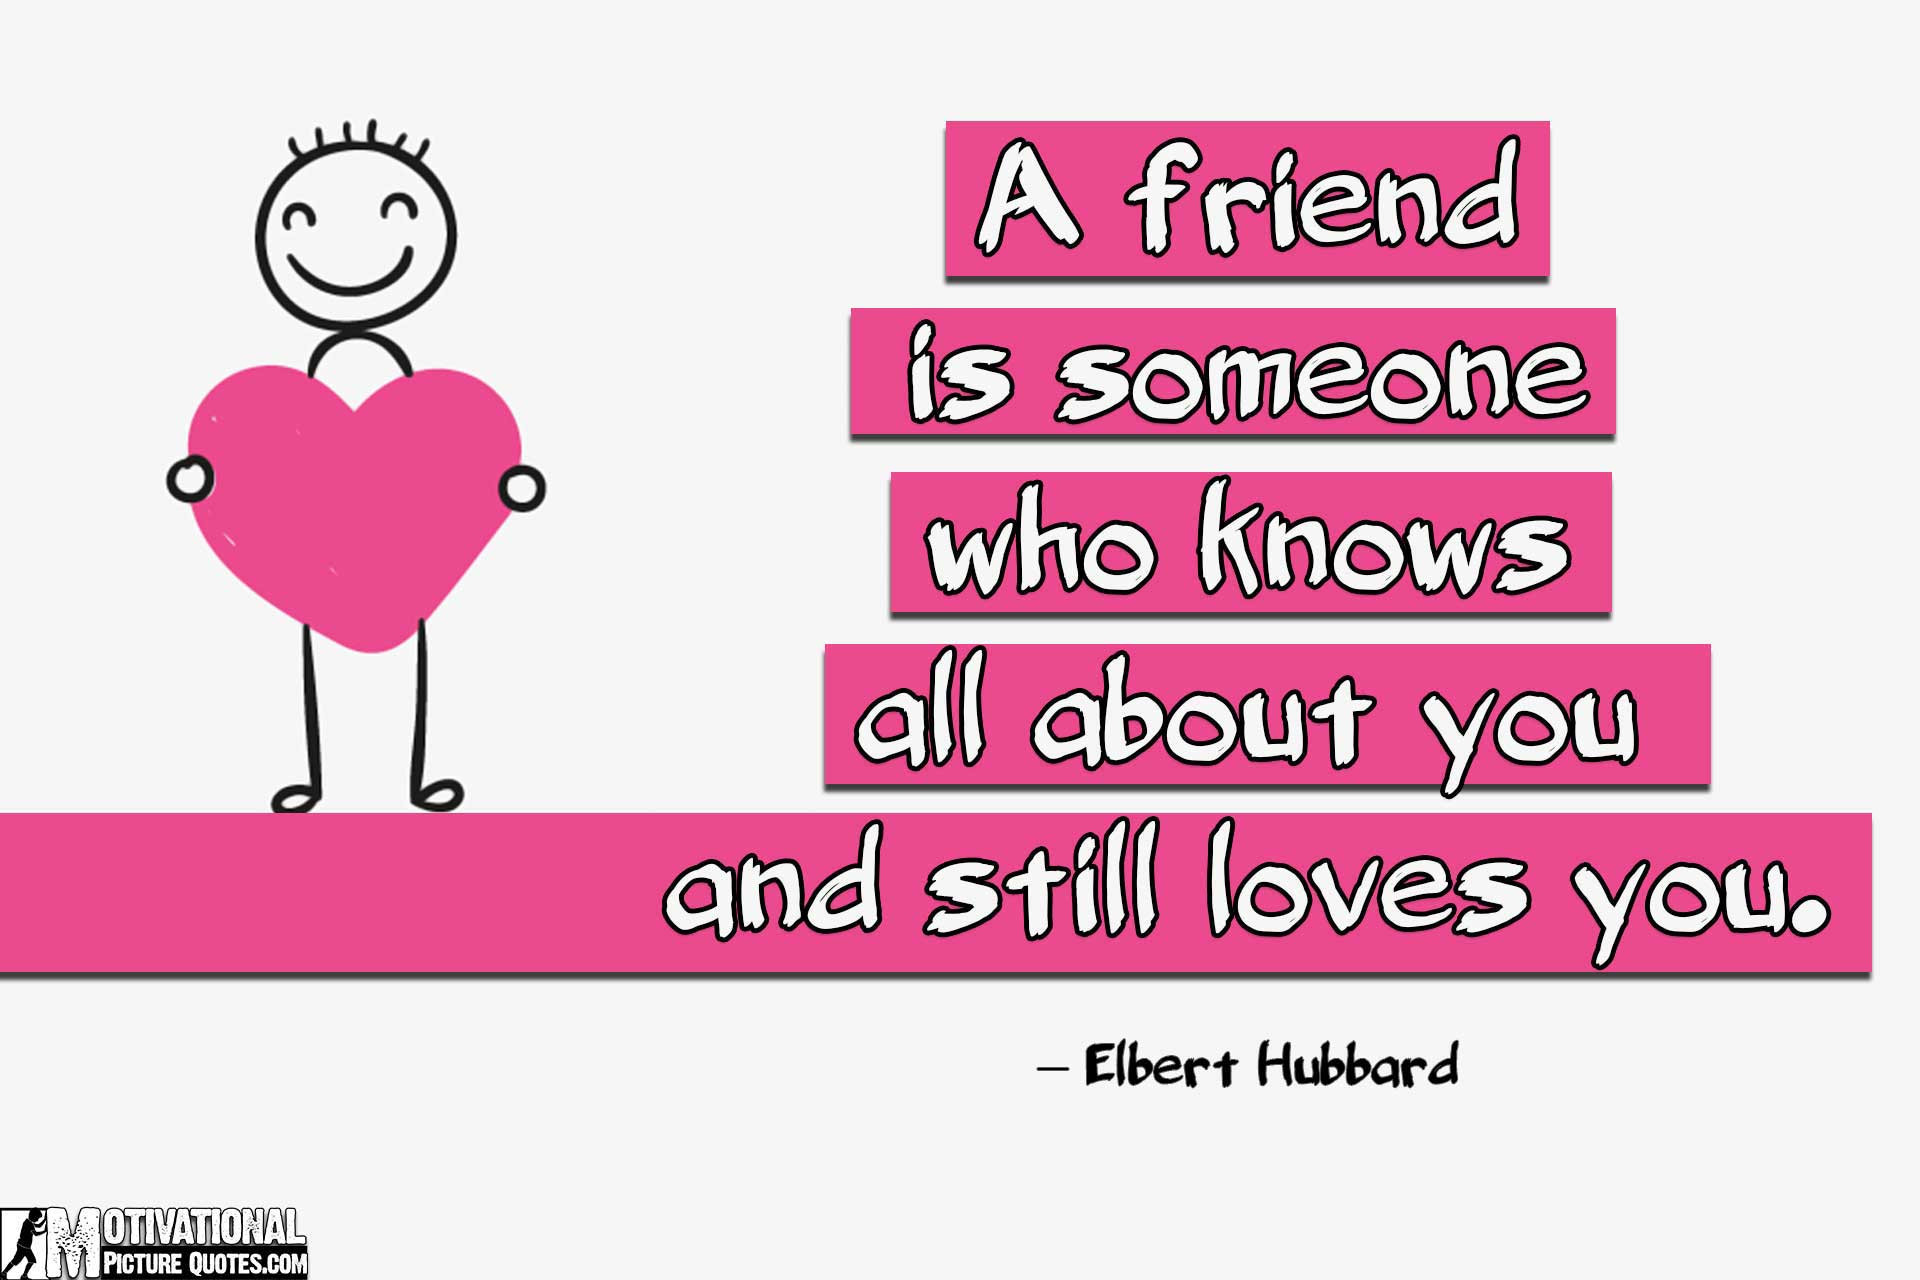 Free Friendship Quotes
 25 Inspirational Friendship Quotes